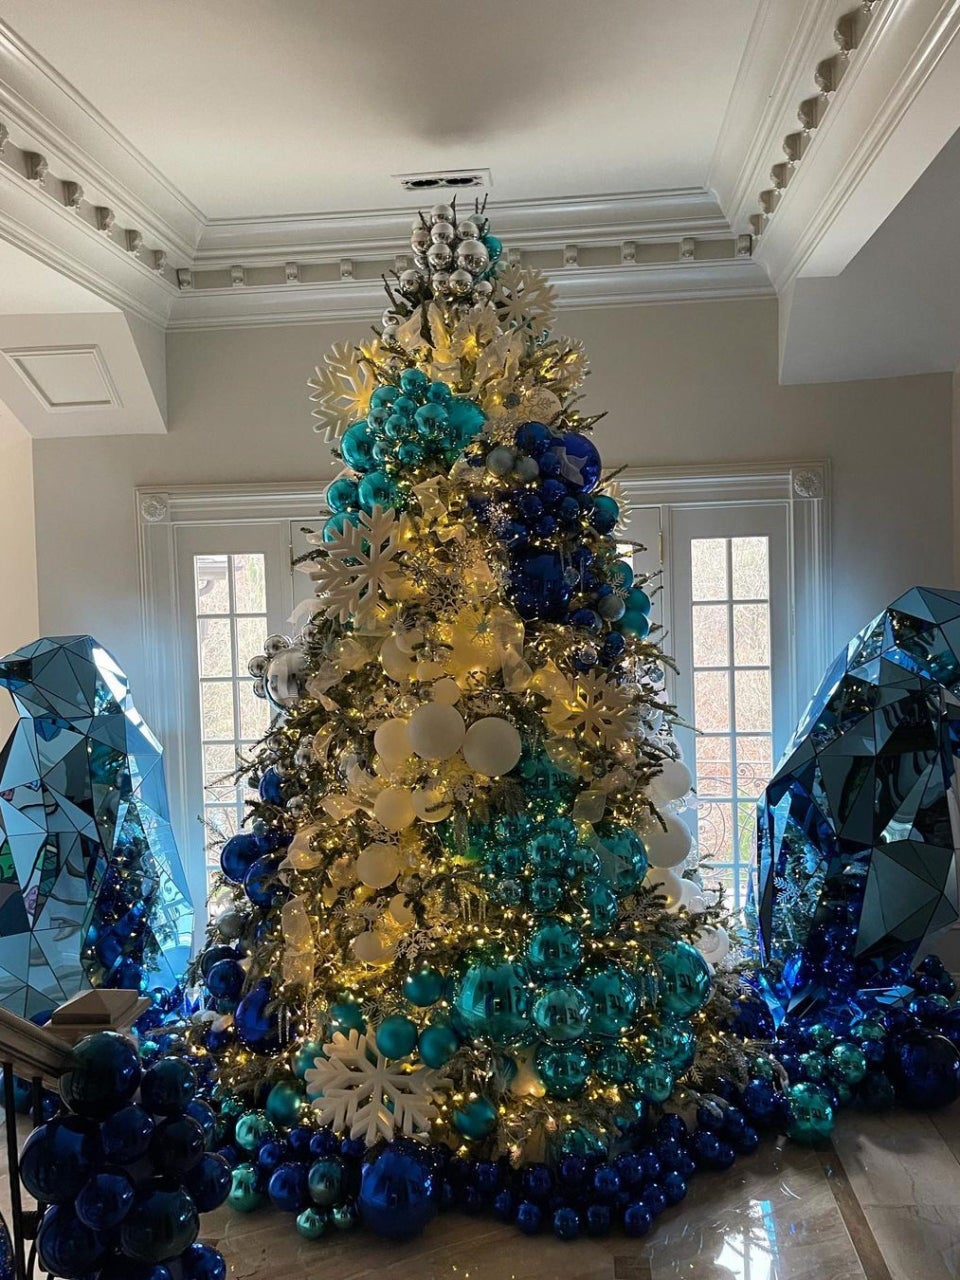 It’s Lit! The Stars Are Going All Out With Their Home Holiday Decor